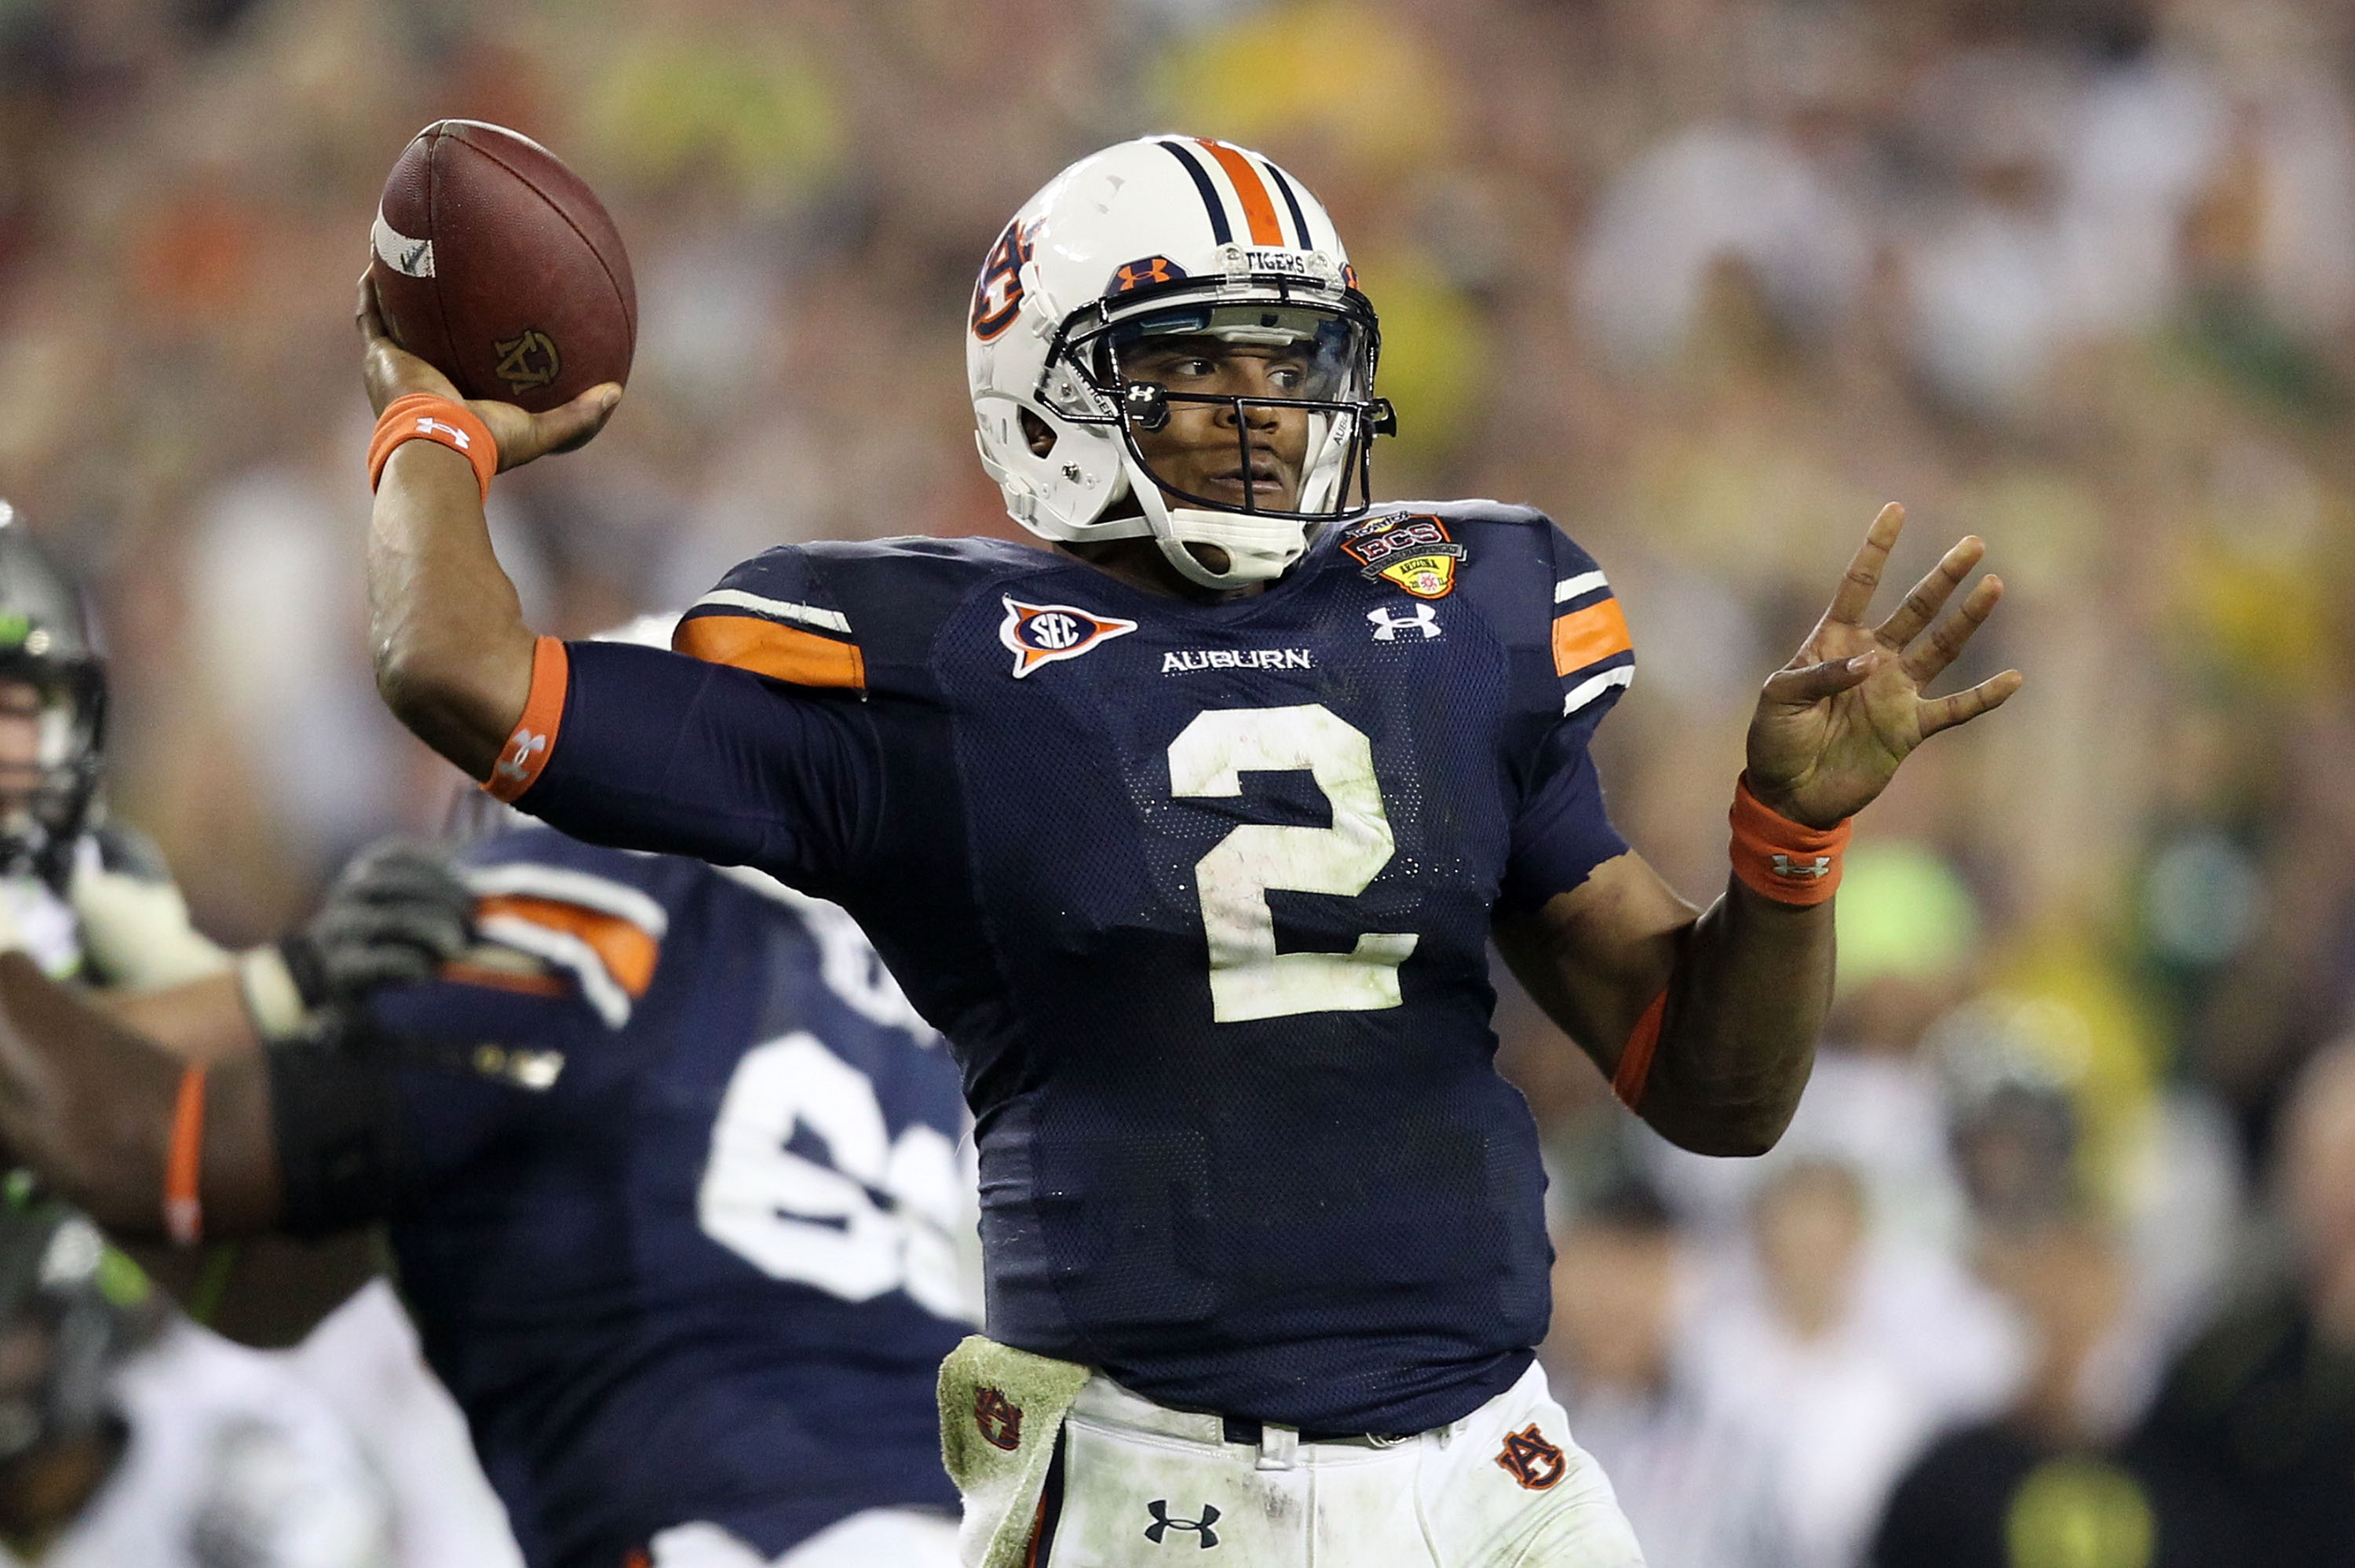 GLENDALE, AZ - JANUARY 10:  Cameron Newton #2 of the Auburn Tigers scrambles against the Oregon Ducks during the Tostitos BCS National Championship Game at University of Phoenix Stadium on January 10, 2011 in Glendale, Arizona.  (Photo by Christian Peters